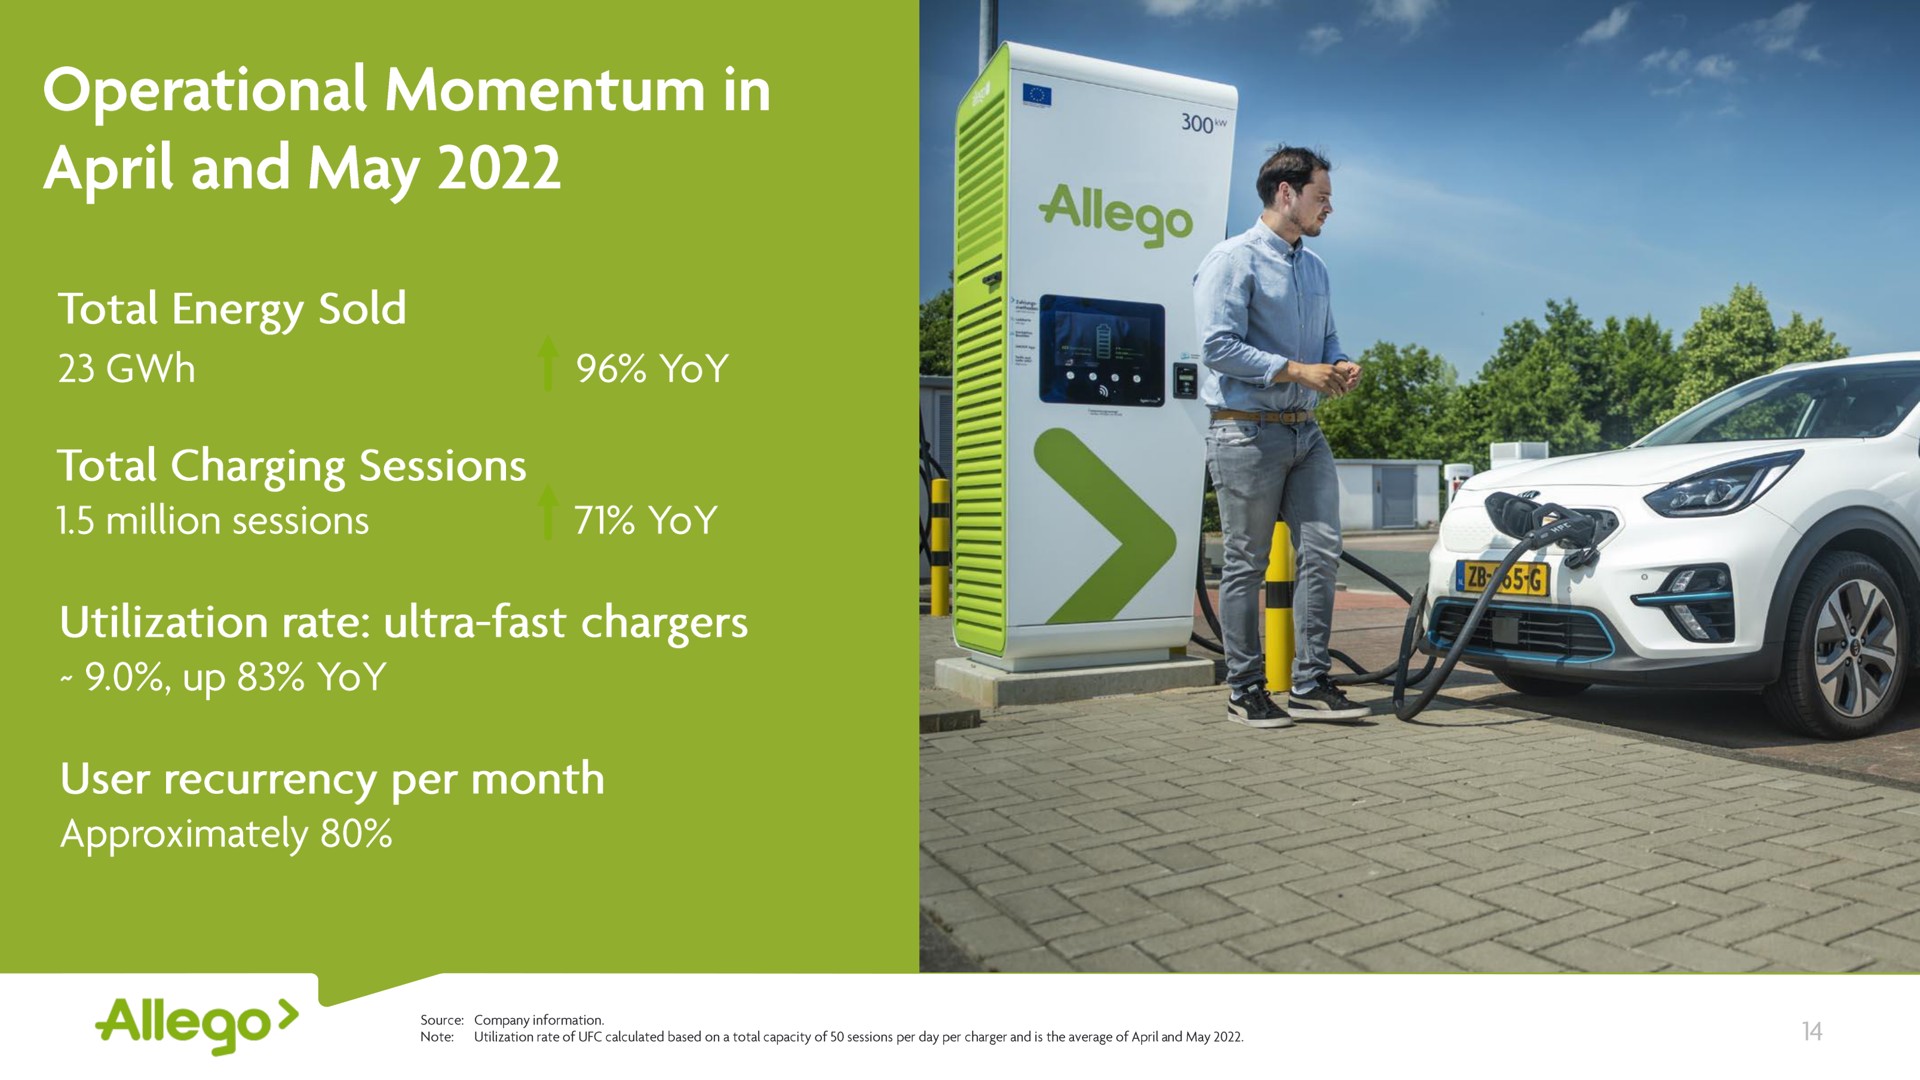 operational momentum in and may total energy sold in yoy total charging sessions million sessions yoy utilization rate ultra fast chargers up yoy user recurrency per month approximately a a a | Allego